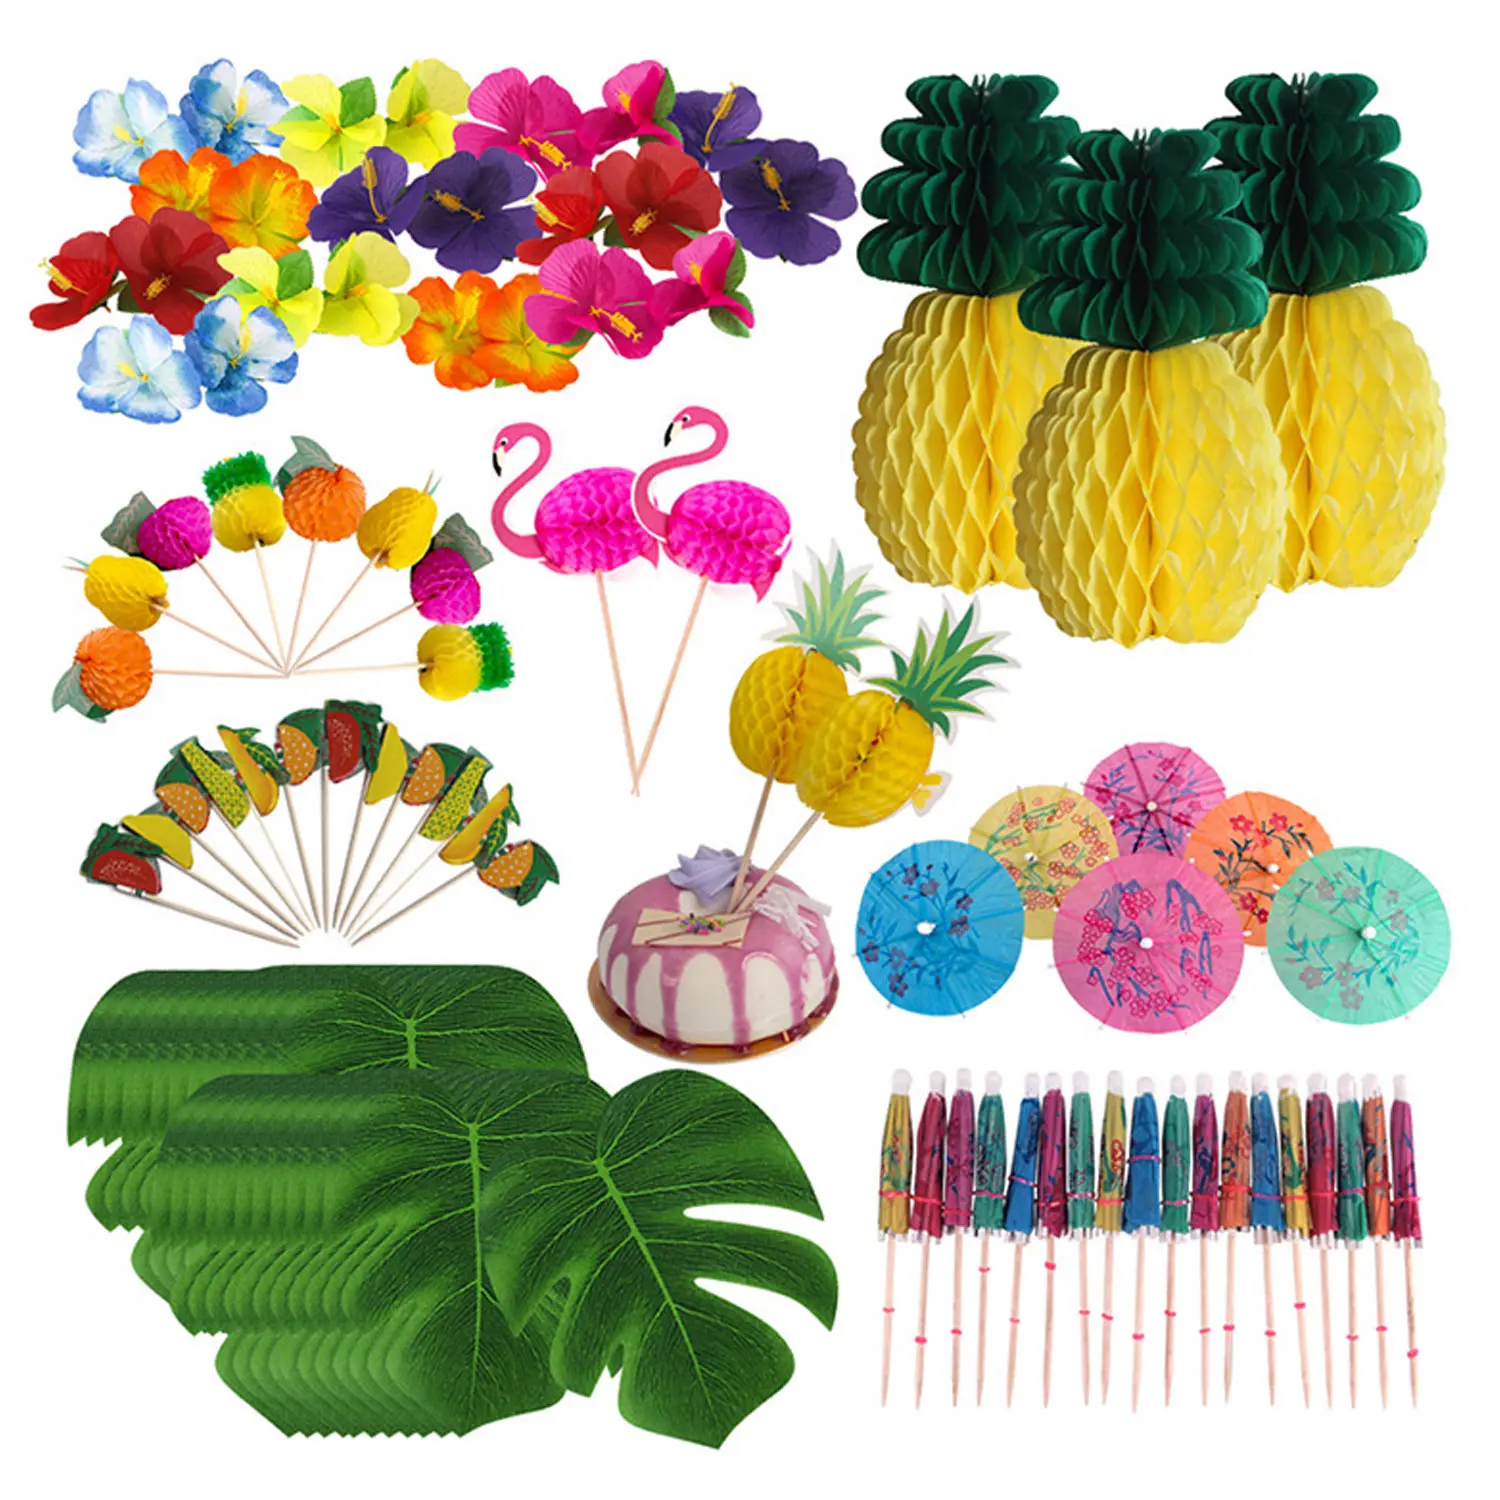 

99pcs Tropical Hawaiian Party Decoration Kit with Silk Hibiscus Flowers Palm Leaves Pineapples Mini Umbrella Cupcake Toppers